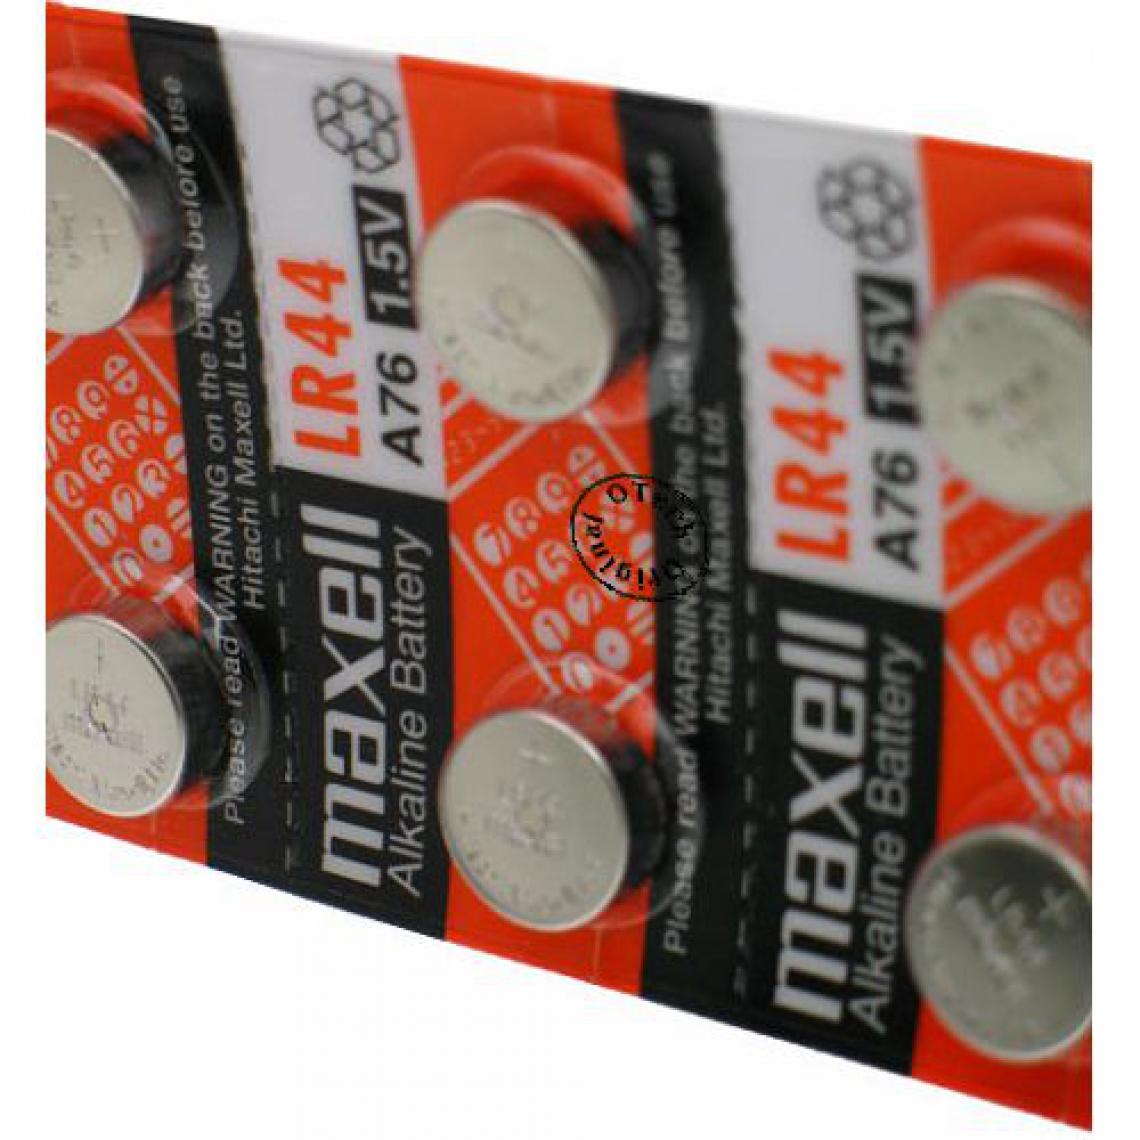 Otech - Pack de 10 piles maxell pour MAXELL GDA76 - Piles rechargeables